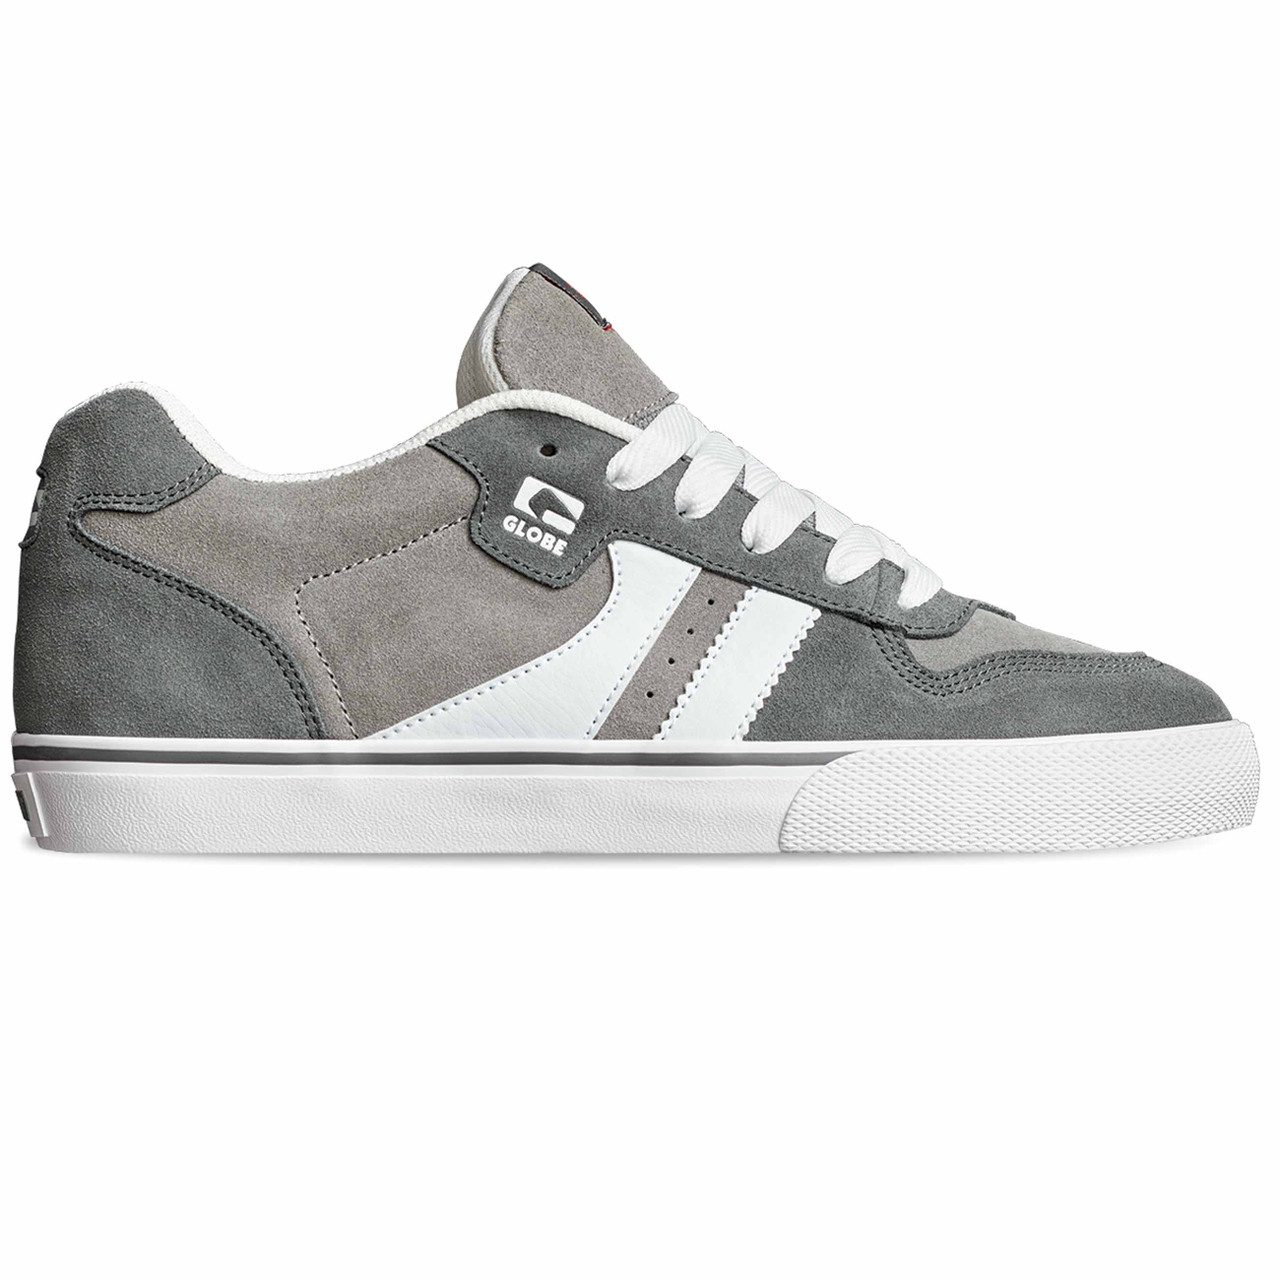 Globe Encore 2 Skate Shoes Trainers Charcoal White - Hyped Sports